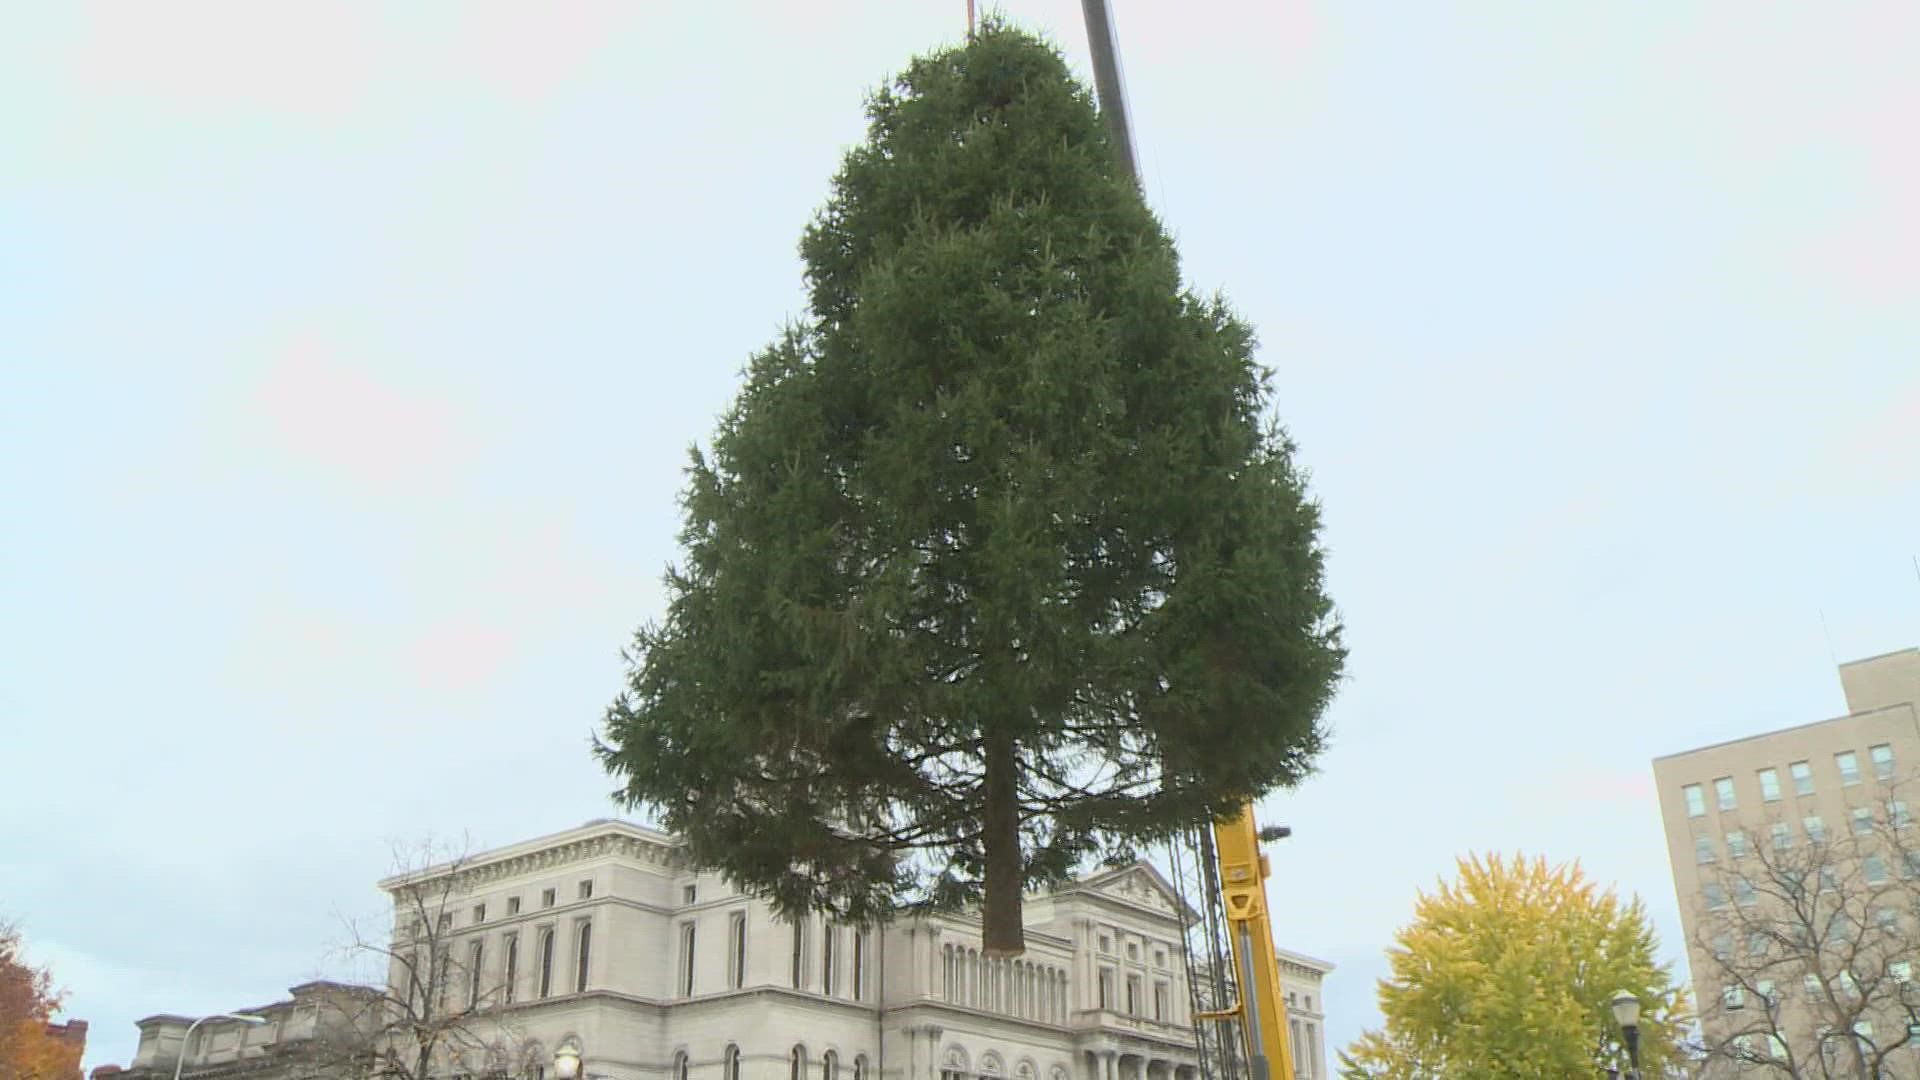 The tree is a 45 ft. spruce, donated by a homeowner in Murray Hills.